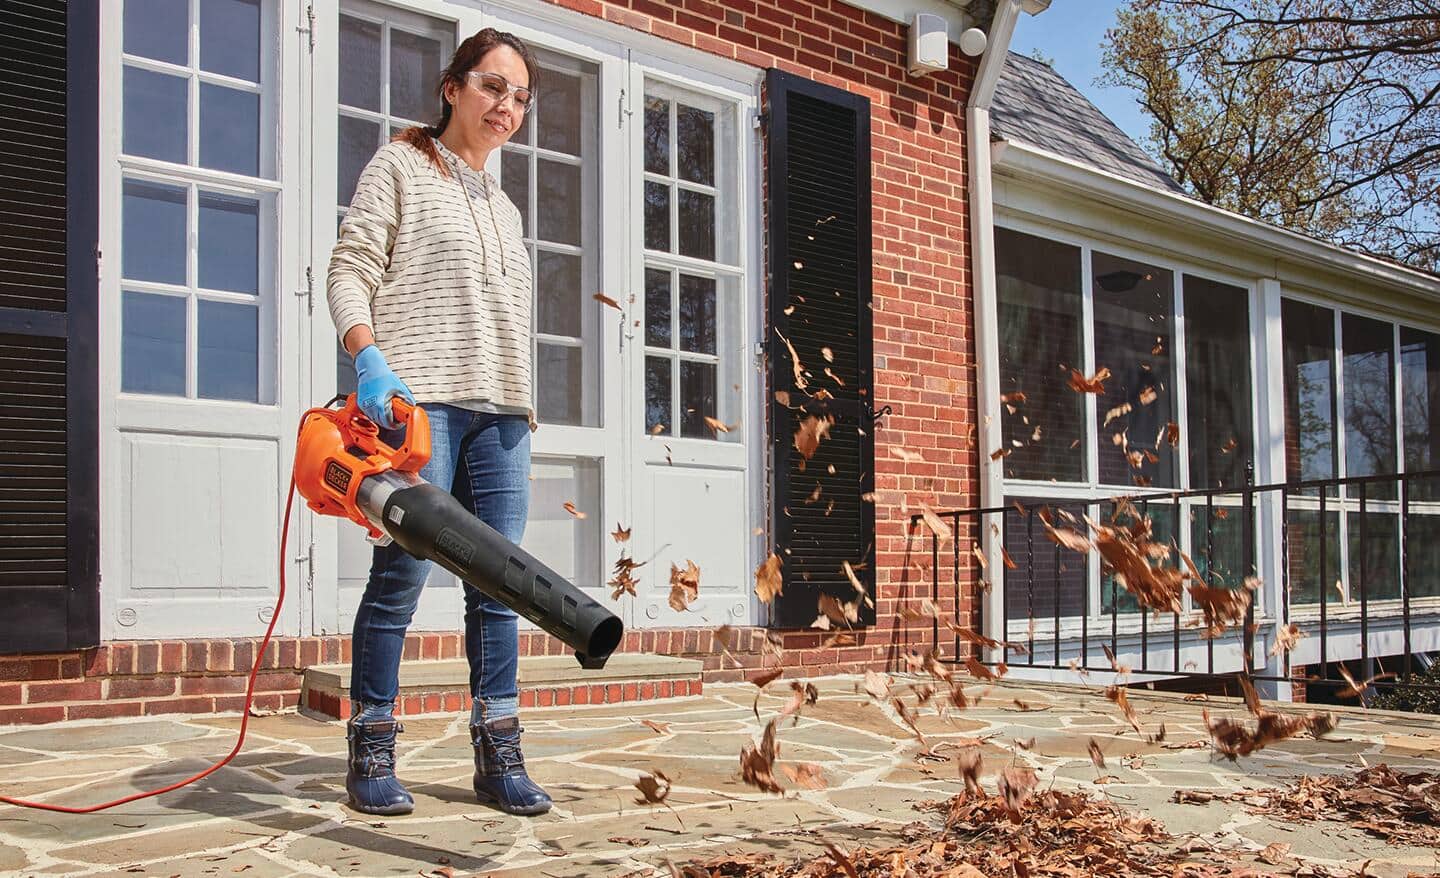 A person uses a corded leaf blower to clear leaves from a patio.